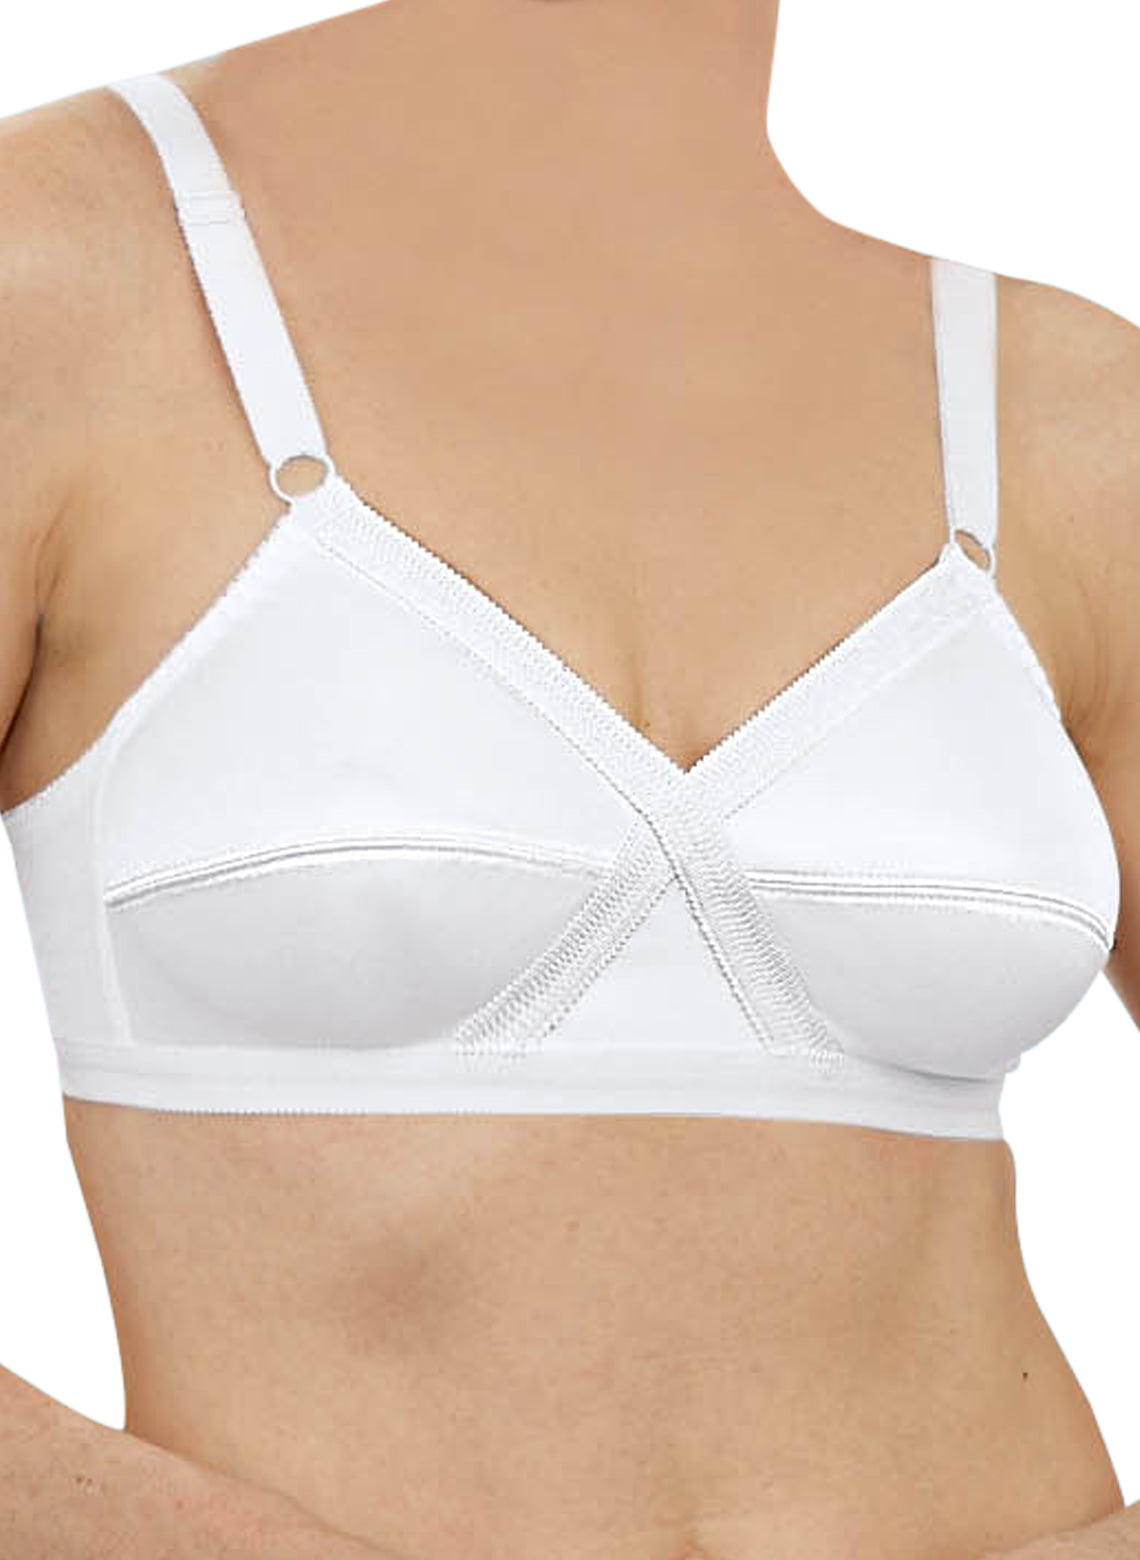 Lift and Support Wireless Bra for Women Crossover Design Full